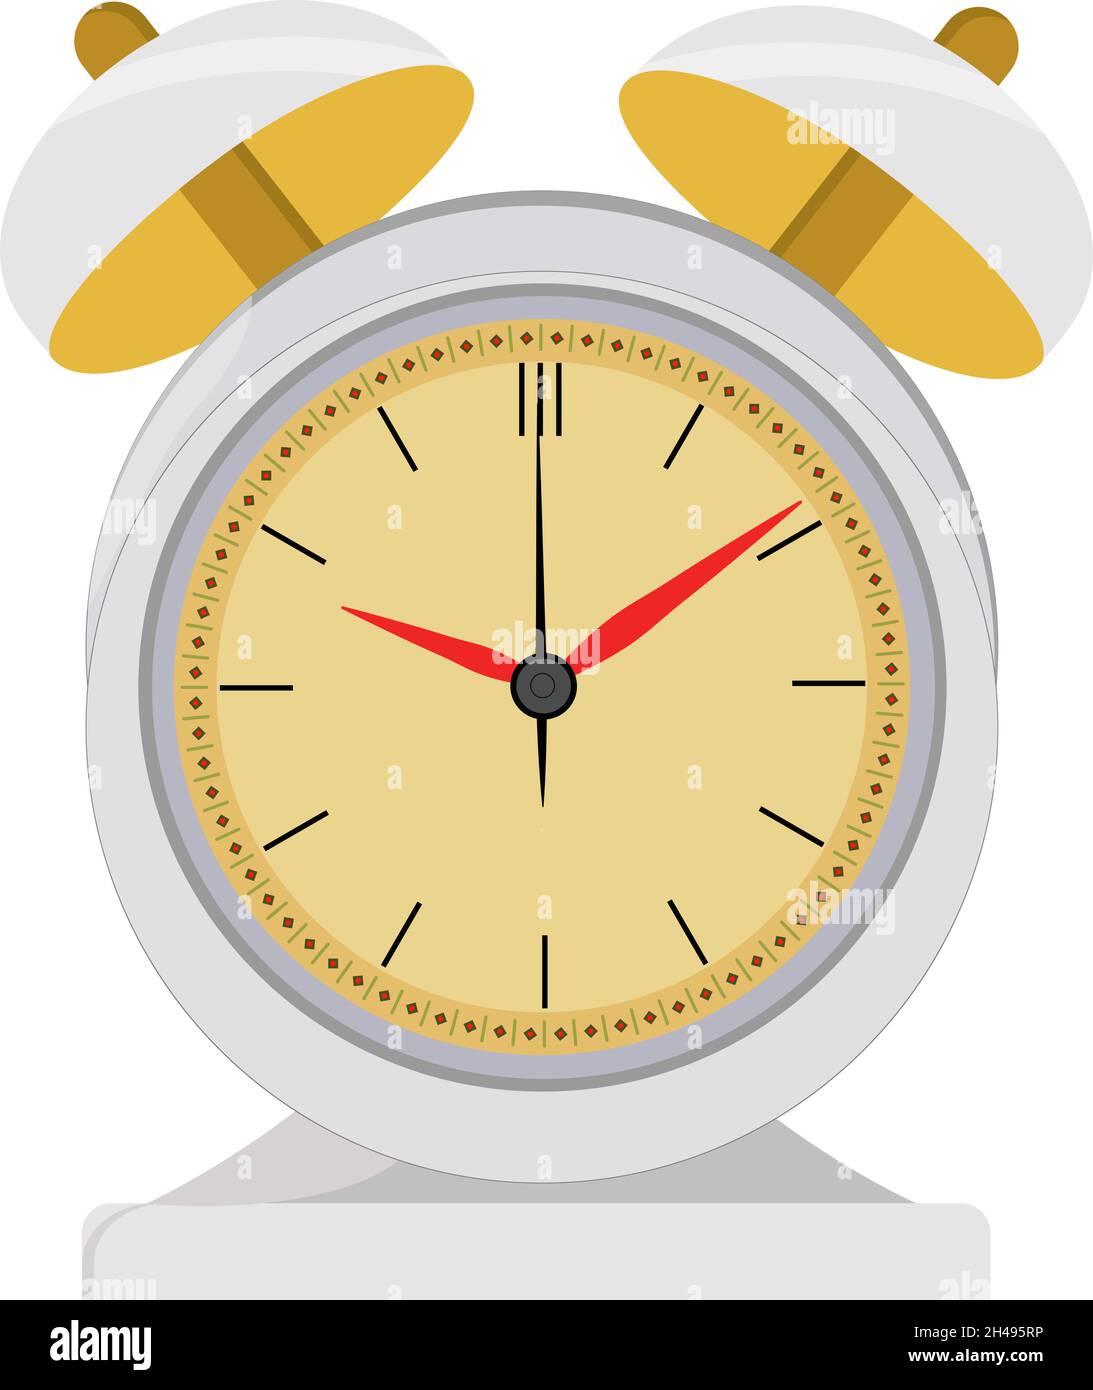 Alarm clock, illustration, vector on a white background. Stock Vector